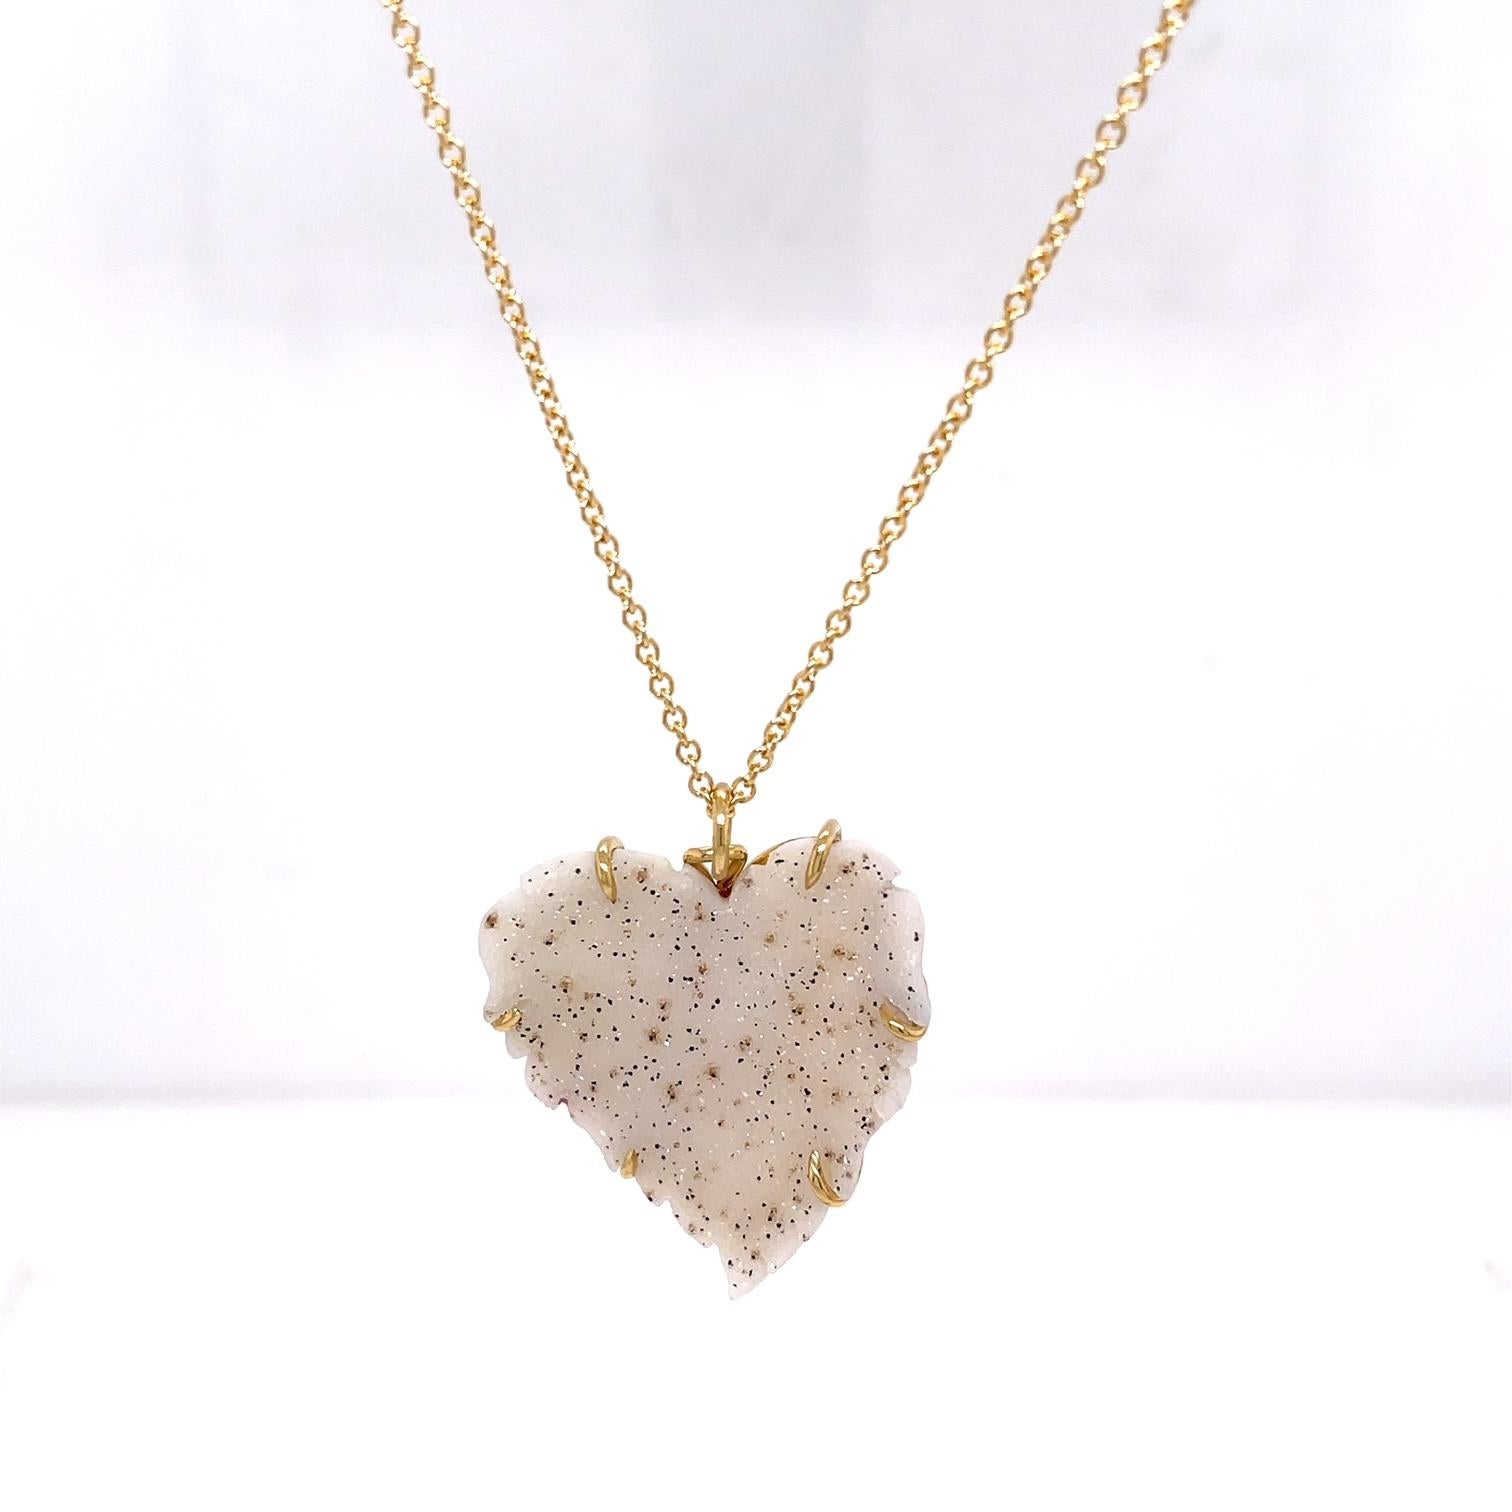 An 18k yellow gold pendant set with one white speckled carved druzy heart, on a 20 inch 1.5mm 14k yellow gold cable chain. This necklace was made and designed by llyn strong.